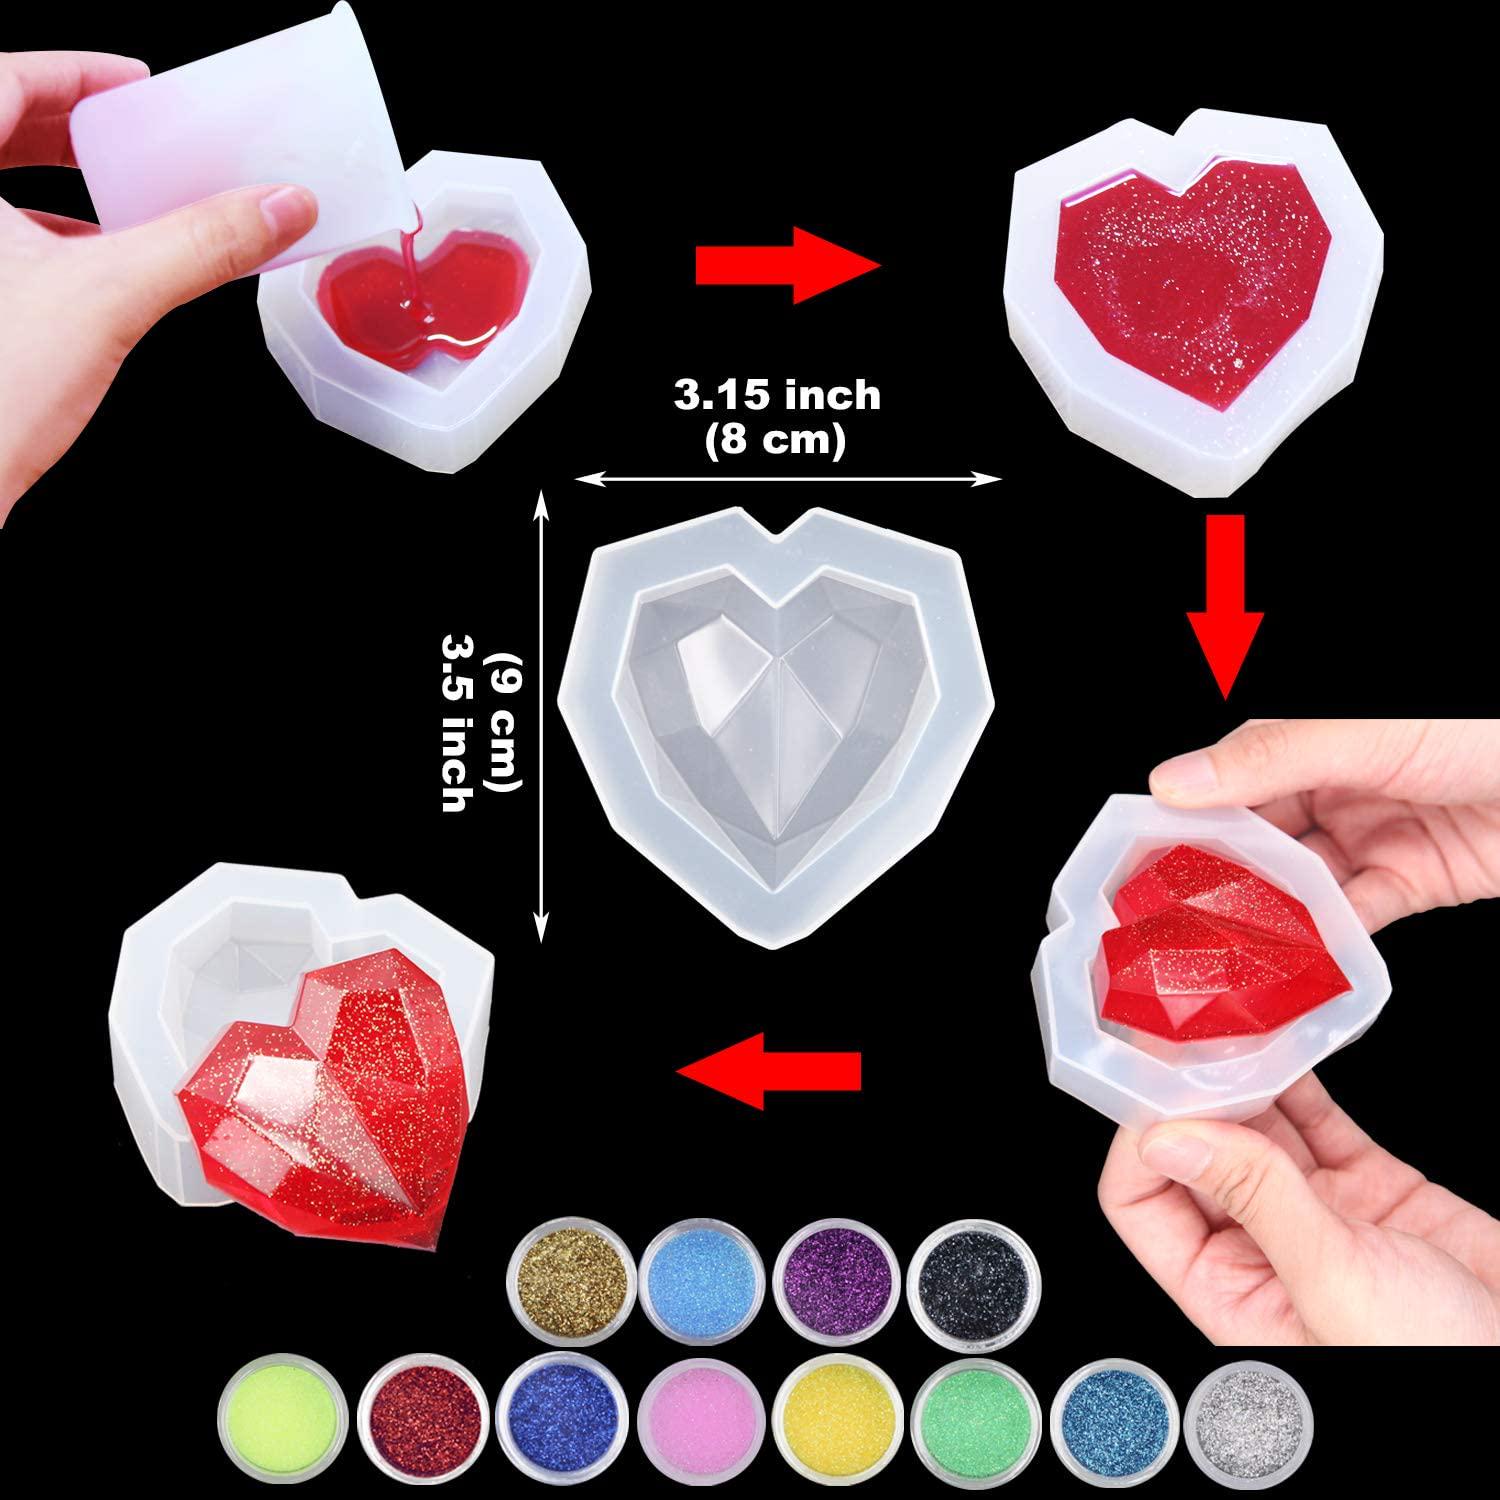 EuTengHao, EuTengHao 178Pcs DIY Casting Silicone Resin Molds Kit Contains Glitter Powder Jewelry Necklace Pendant Resin Molds Big 3D Heart Resin Mold Round Tray Silicone Mold with Making Tools Spoons Droppers